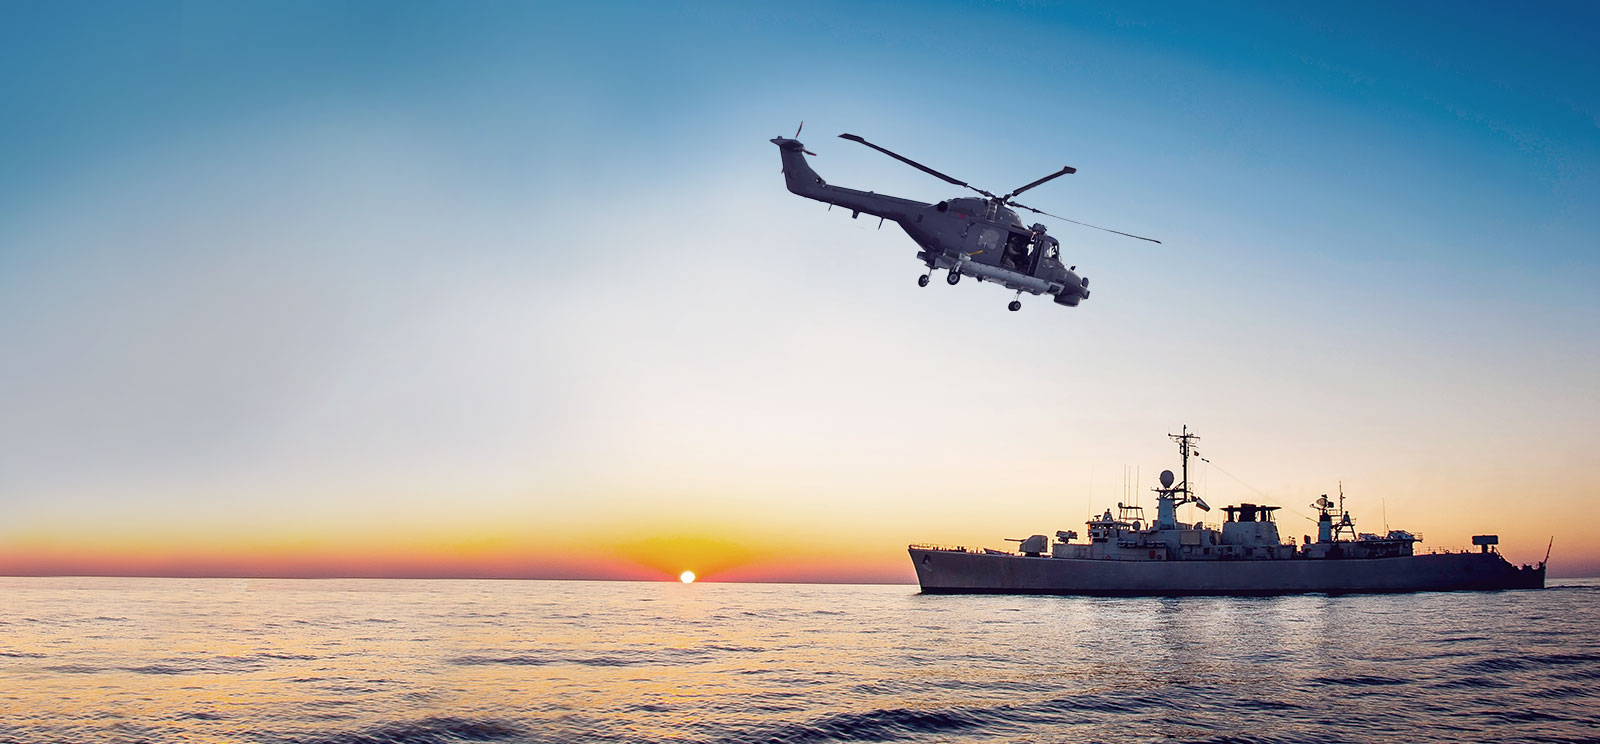 Helicopter approaching combat ship